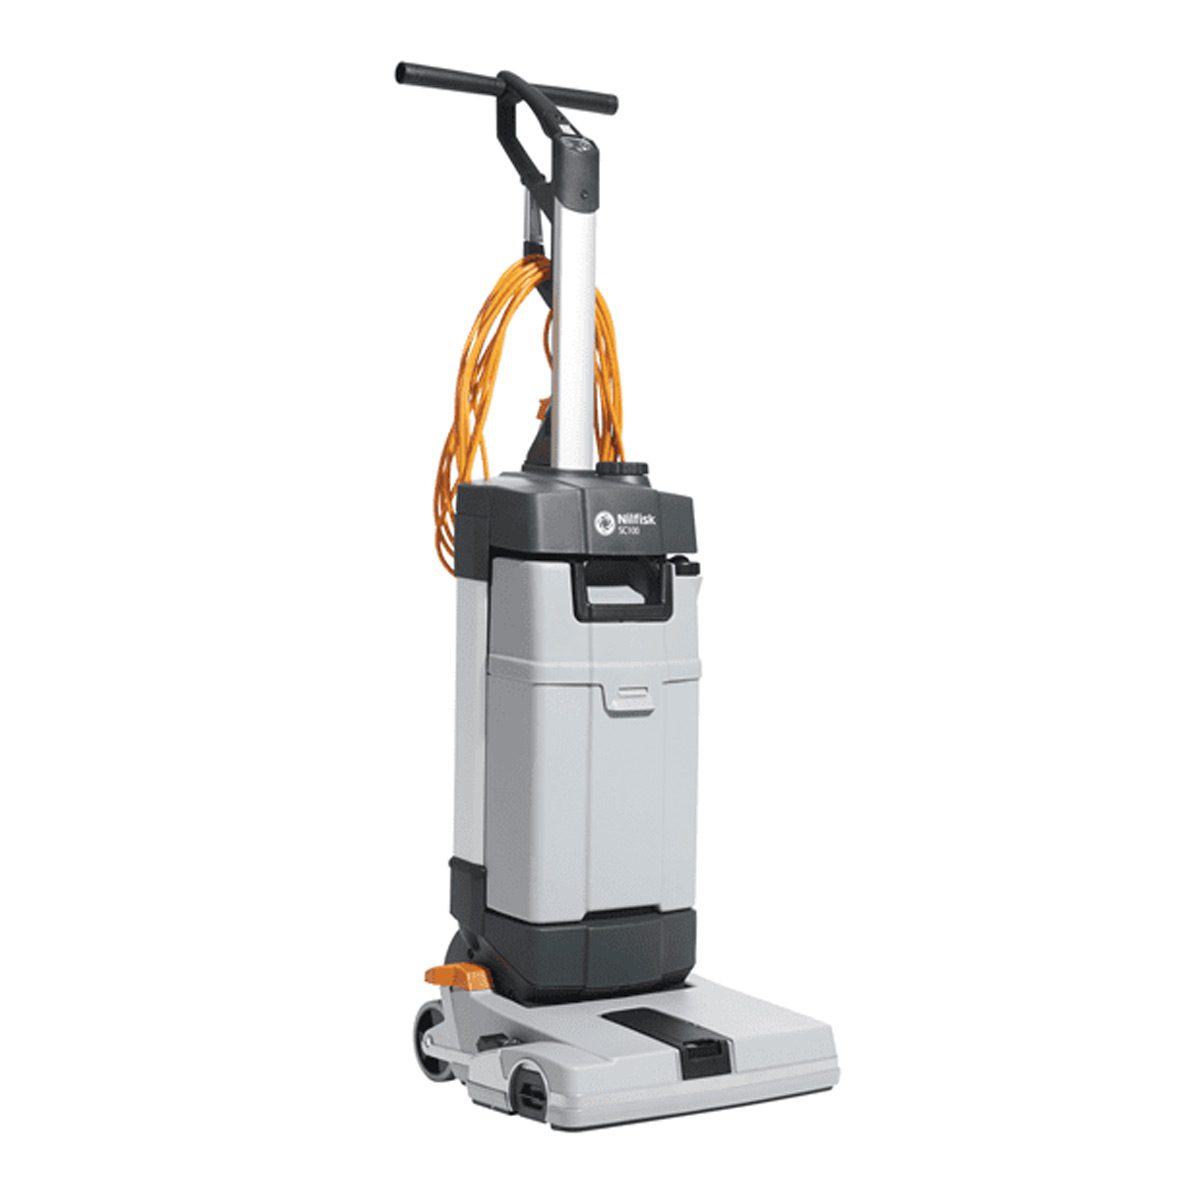 machinery-matting-floor-scrubbers-nilfisk-upright-scrubber-dryer-small-scrubber-dryer-for-in-depth-cleaning-narrow-areas-retail-restaurants-convenience-stores-fast-food-outlets-vjs-distributors-SC100